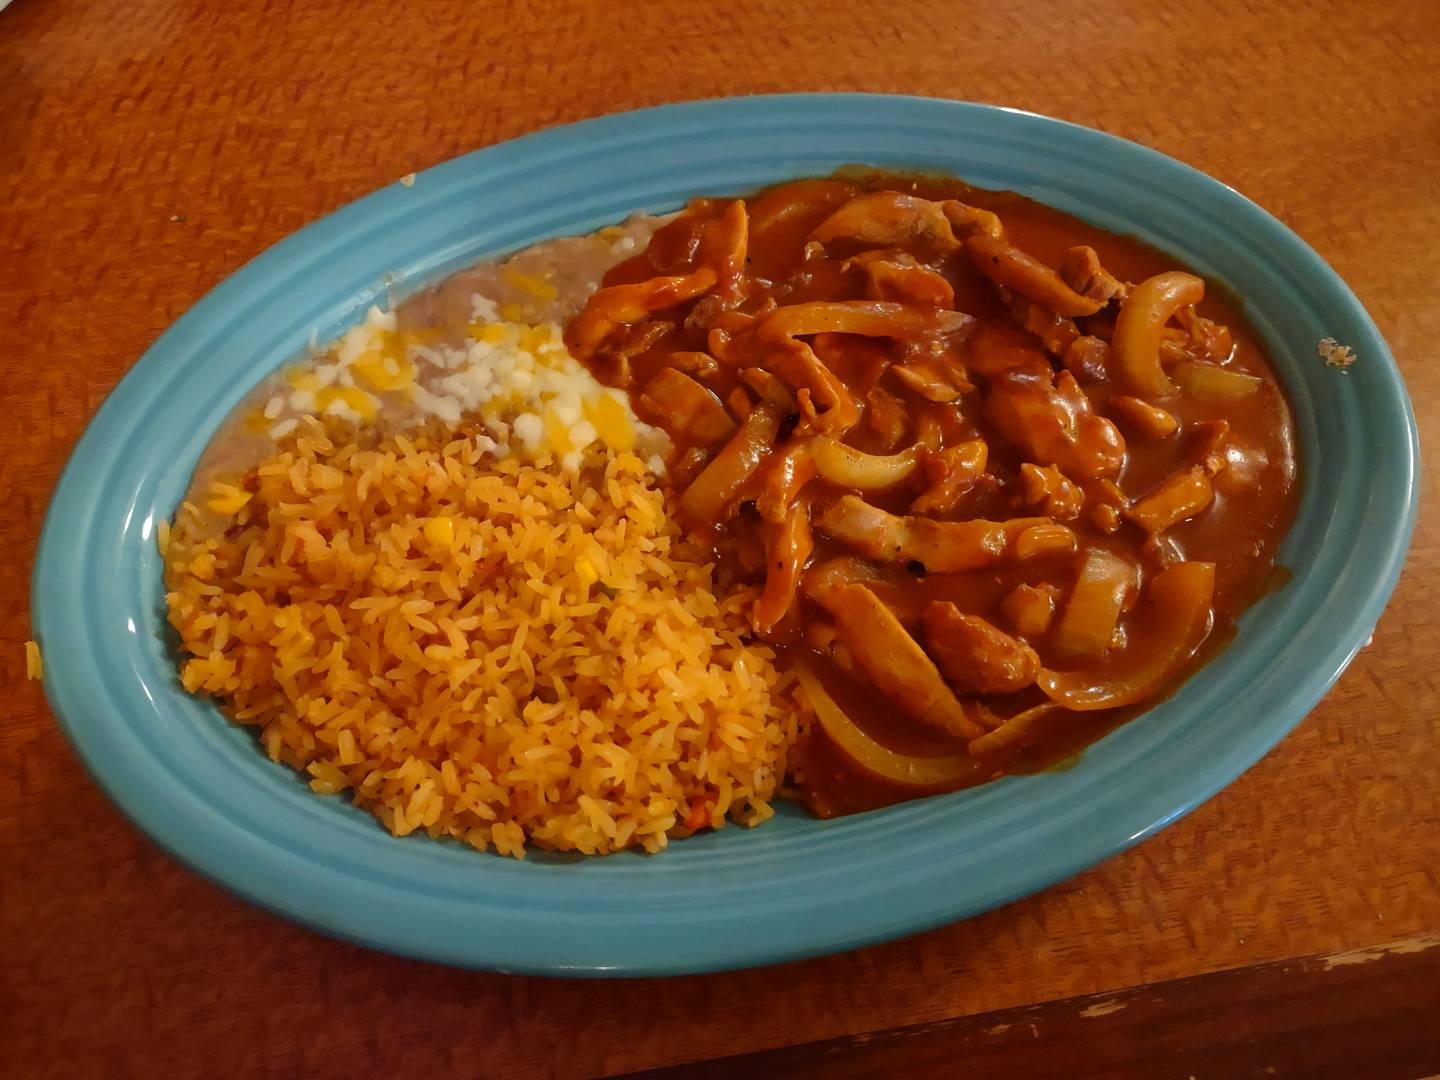 The chili Colorado with chicken at Mr. Salsas is served in red sauce with onions and a side of rice.